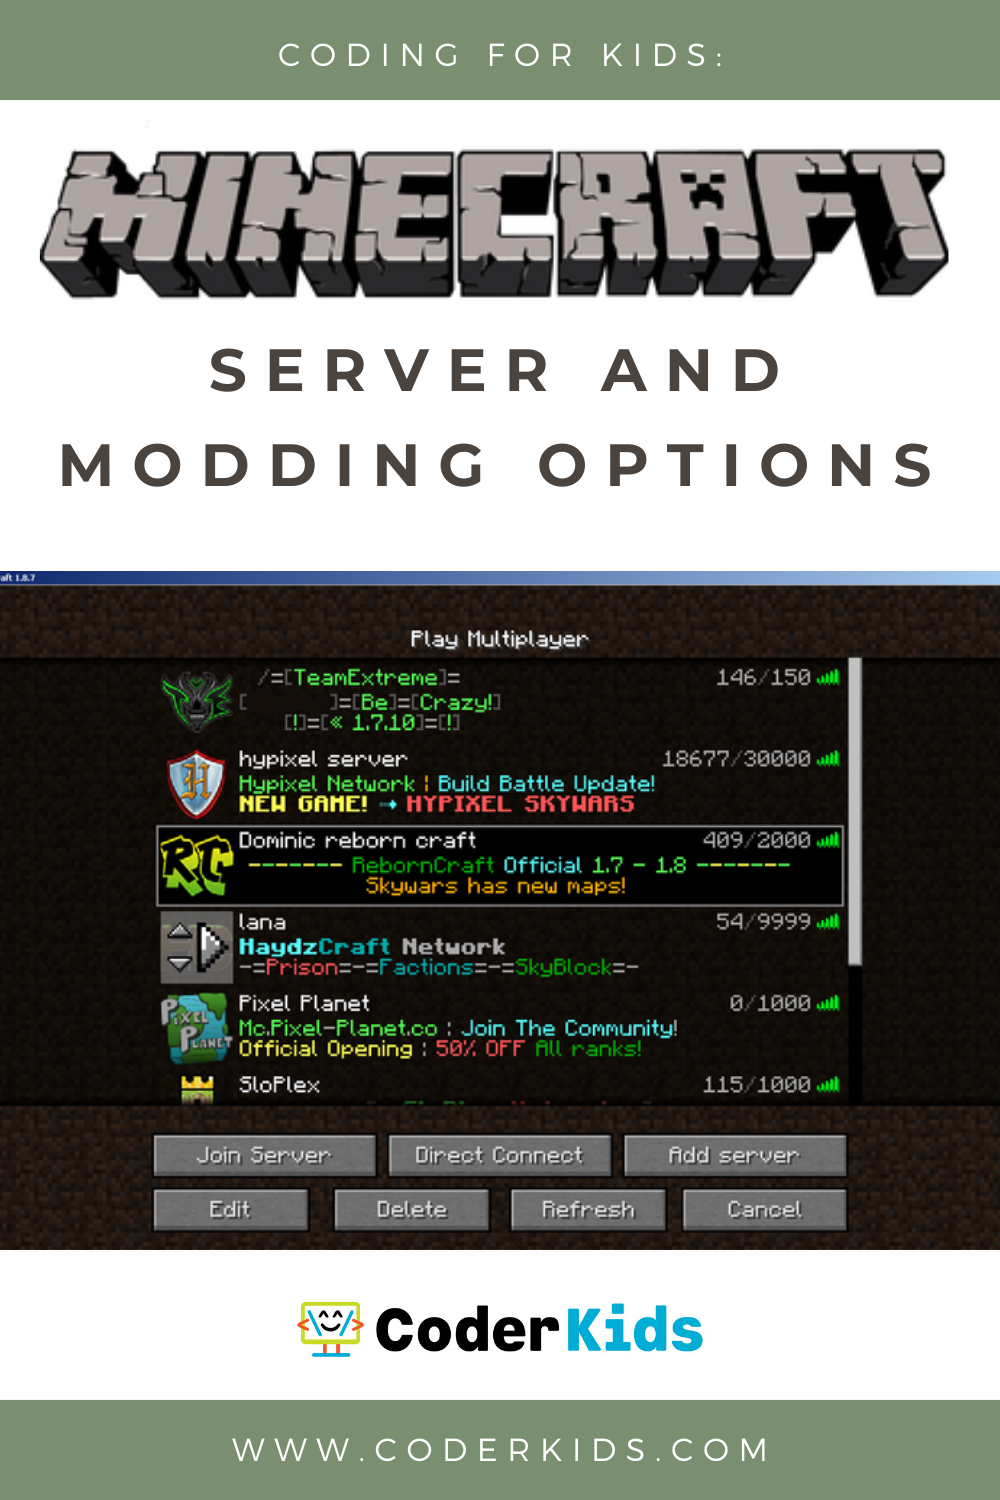 How to set up a Minecraft Realms multiplayer server